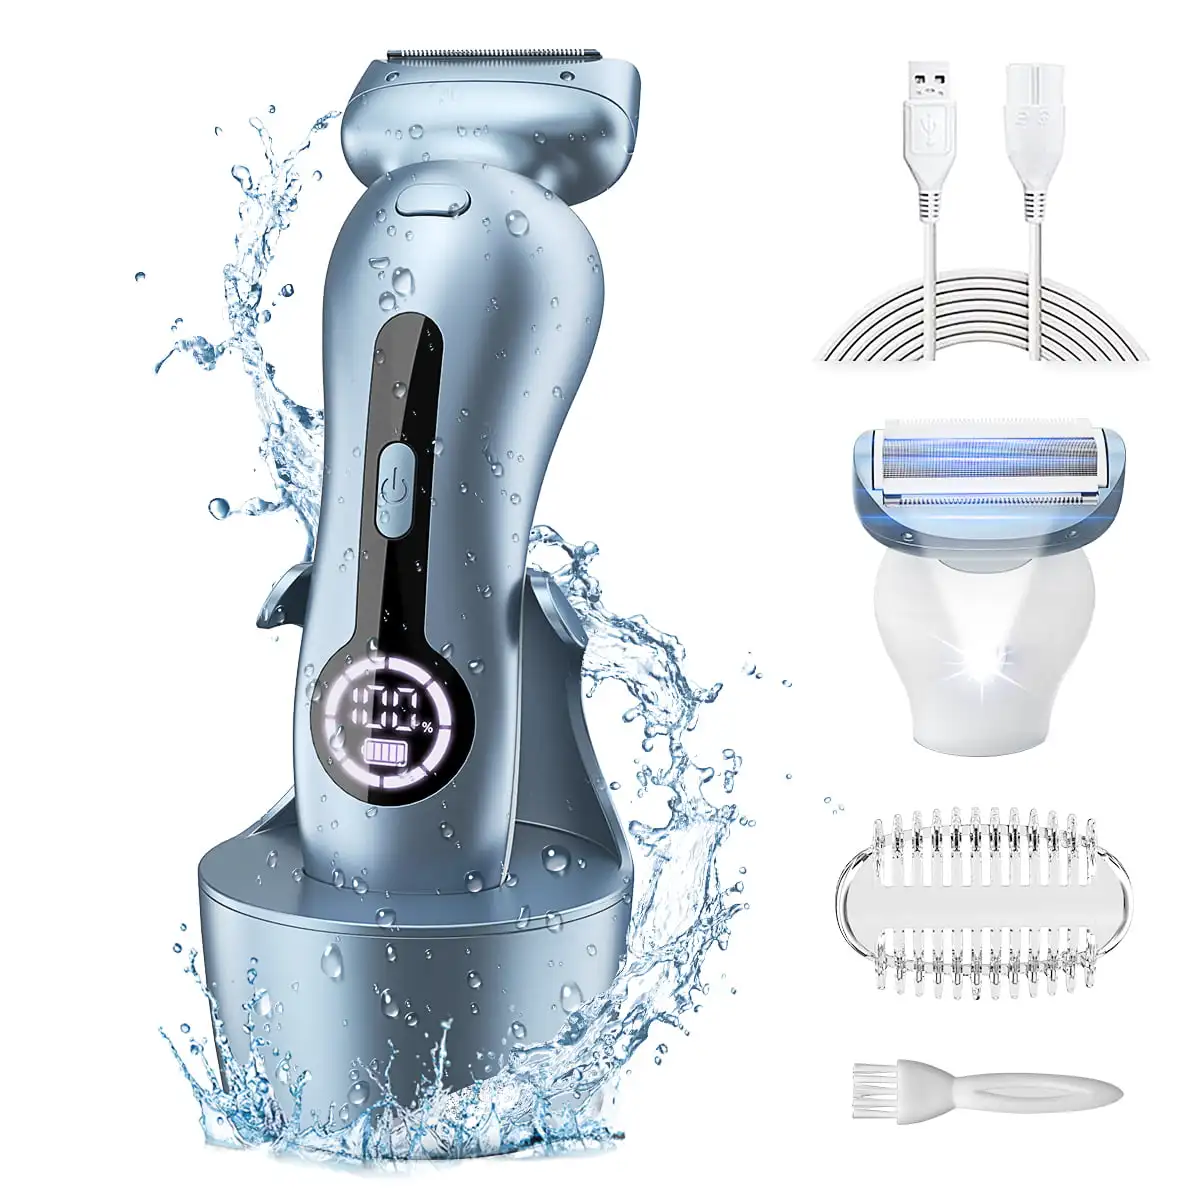 

Electric Shaver for Women, Womens Electric Razor Lady IPX7 Waterproof Legs Arm Underarm Painless Epilator Body Hair Remover Rech